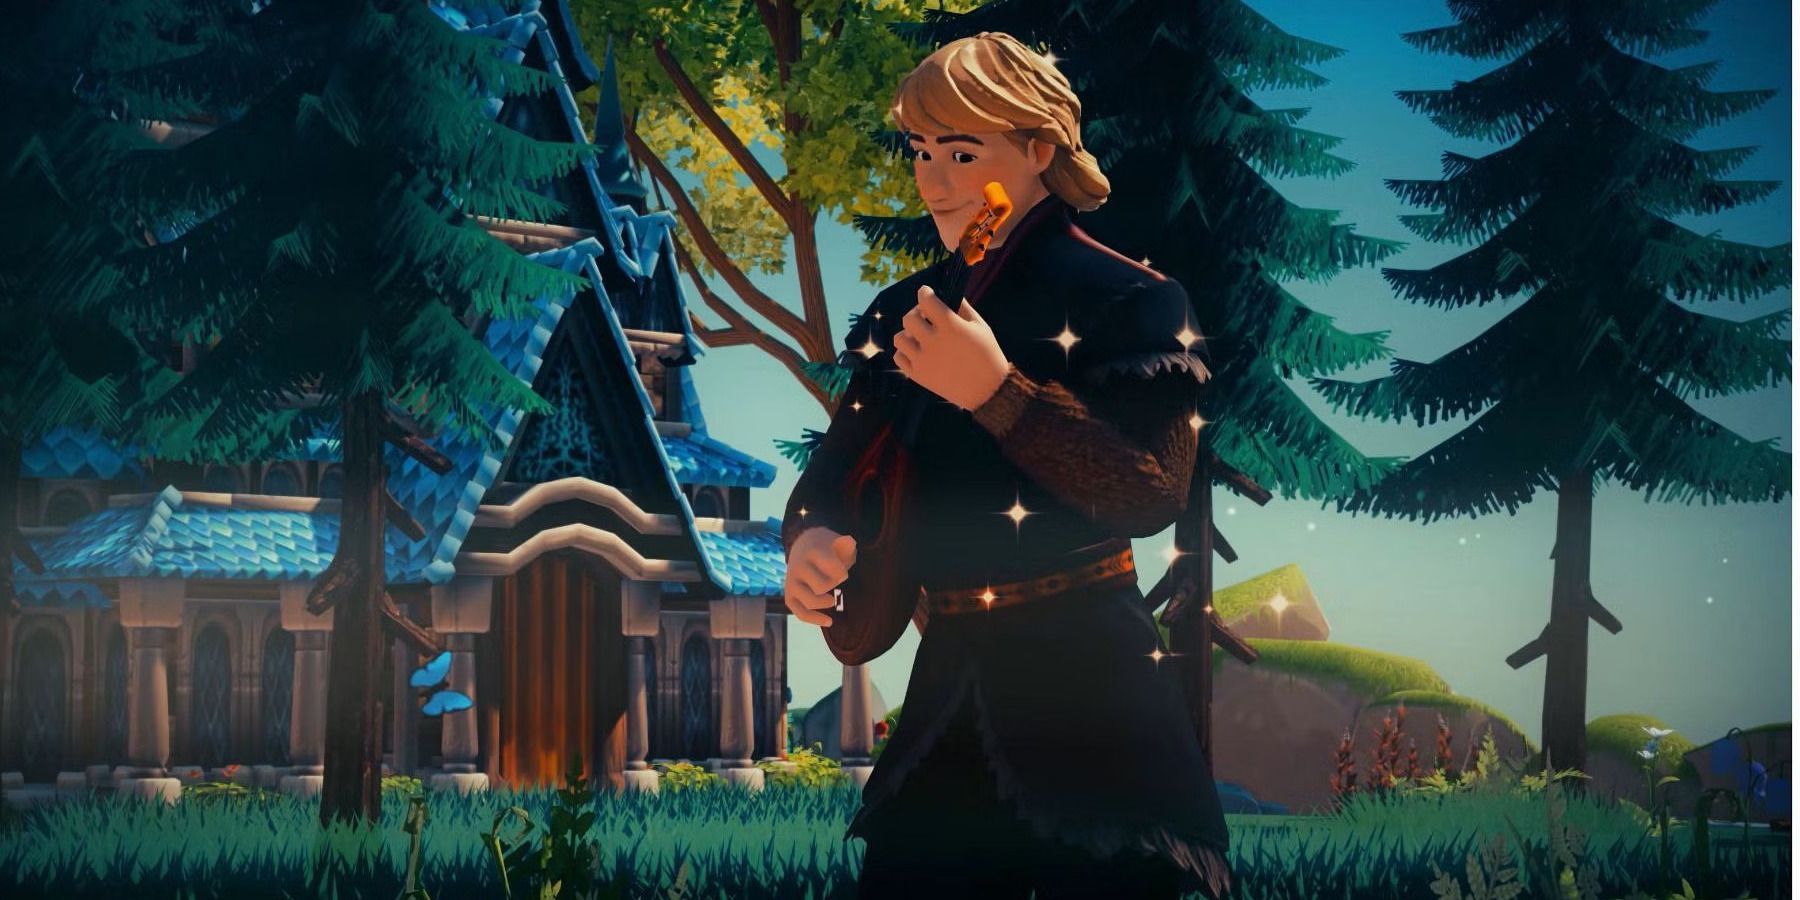 Strange Disney Dreamlight Valley Bug Adds Kristoff’s Face to a Player’s Legs